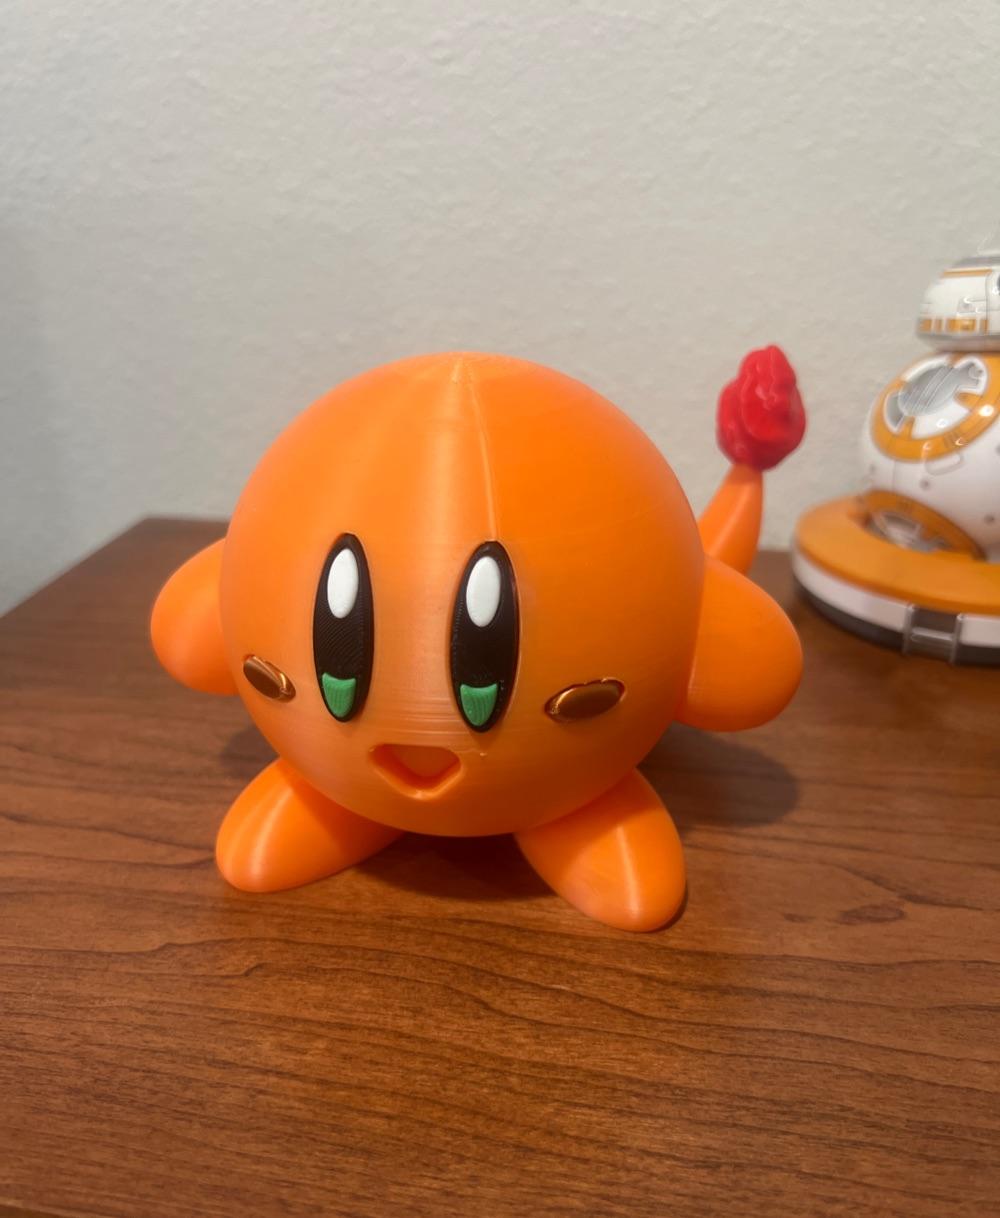 Charmander kirby - Multipart - Great model. I’m liking the Kirby variations. - 3d model